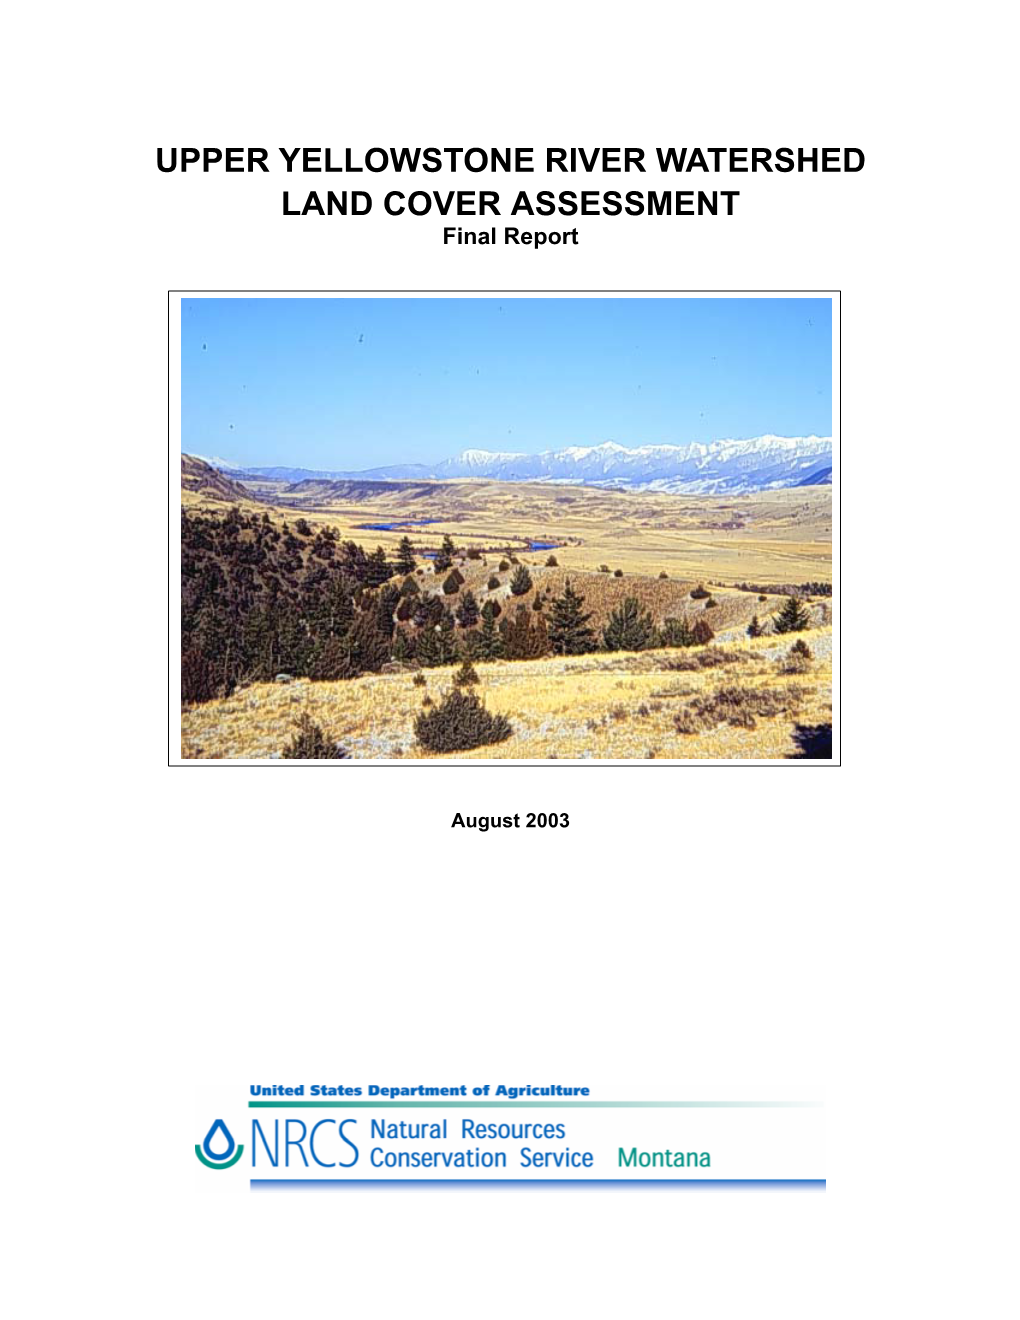 UPPER YELLOWSTONE RIVER WATERSHED LAND COVER ASSESSMENT Final Report